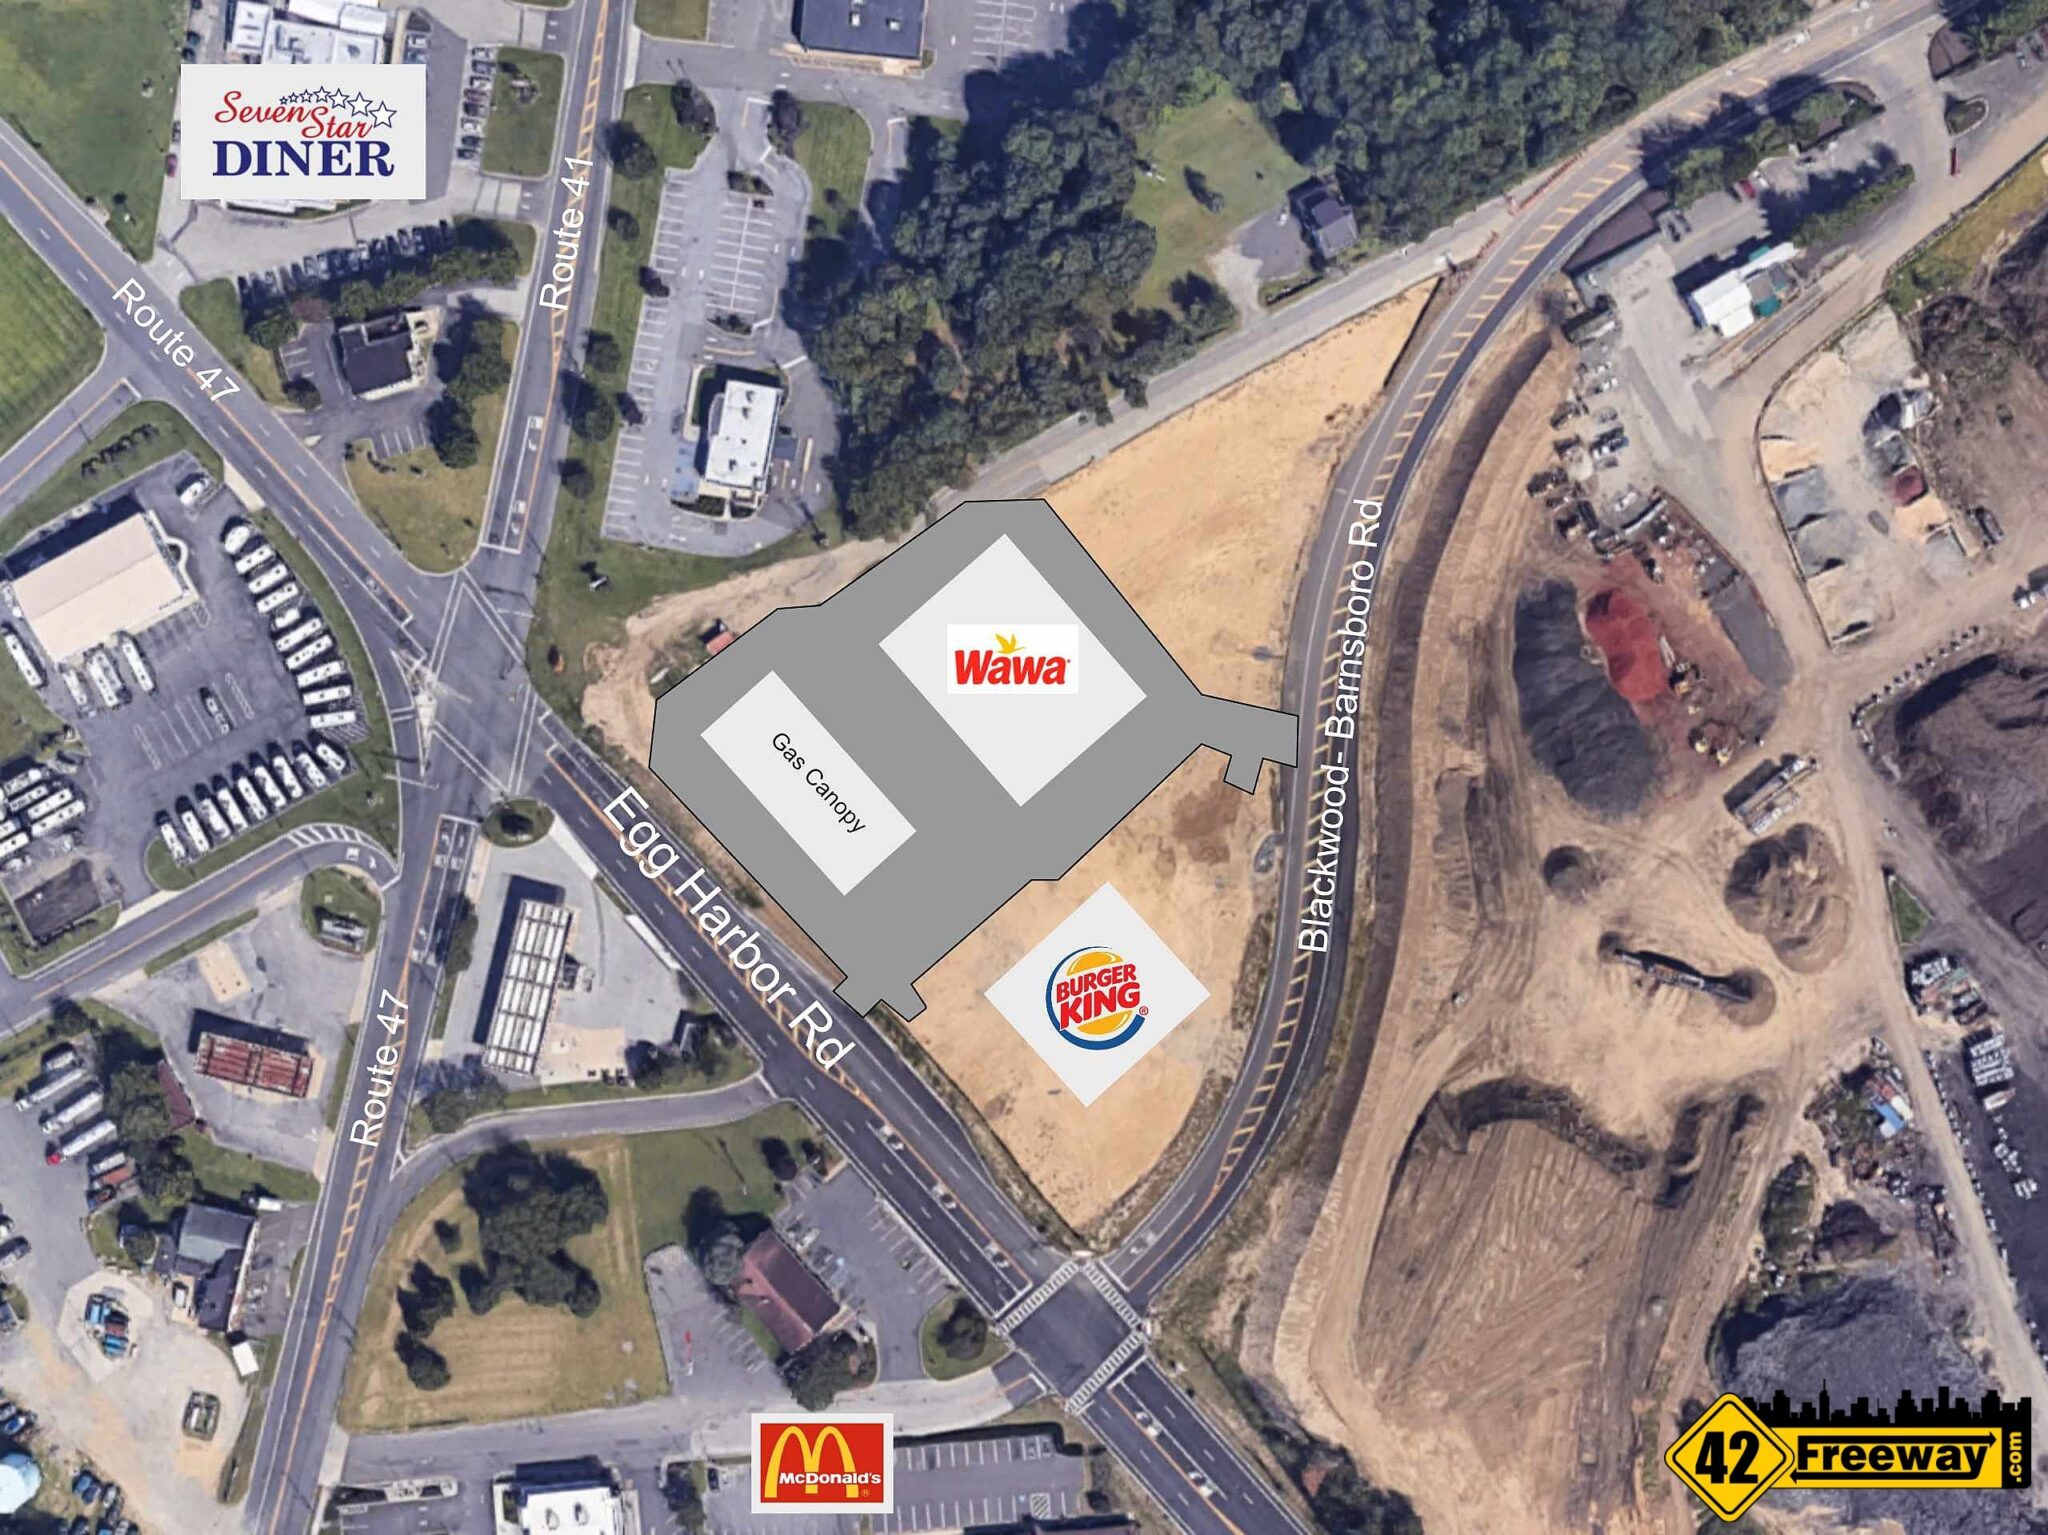 Wawa at 5-Points Washington Twp Now Has Full Approvals. Dirt Is Getting